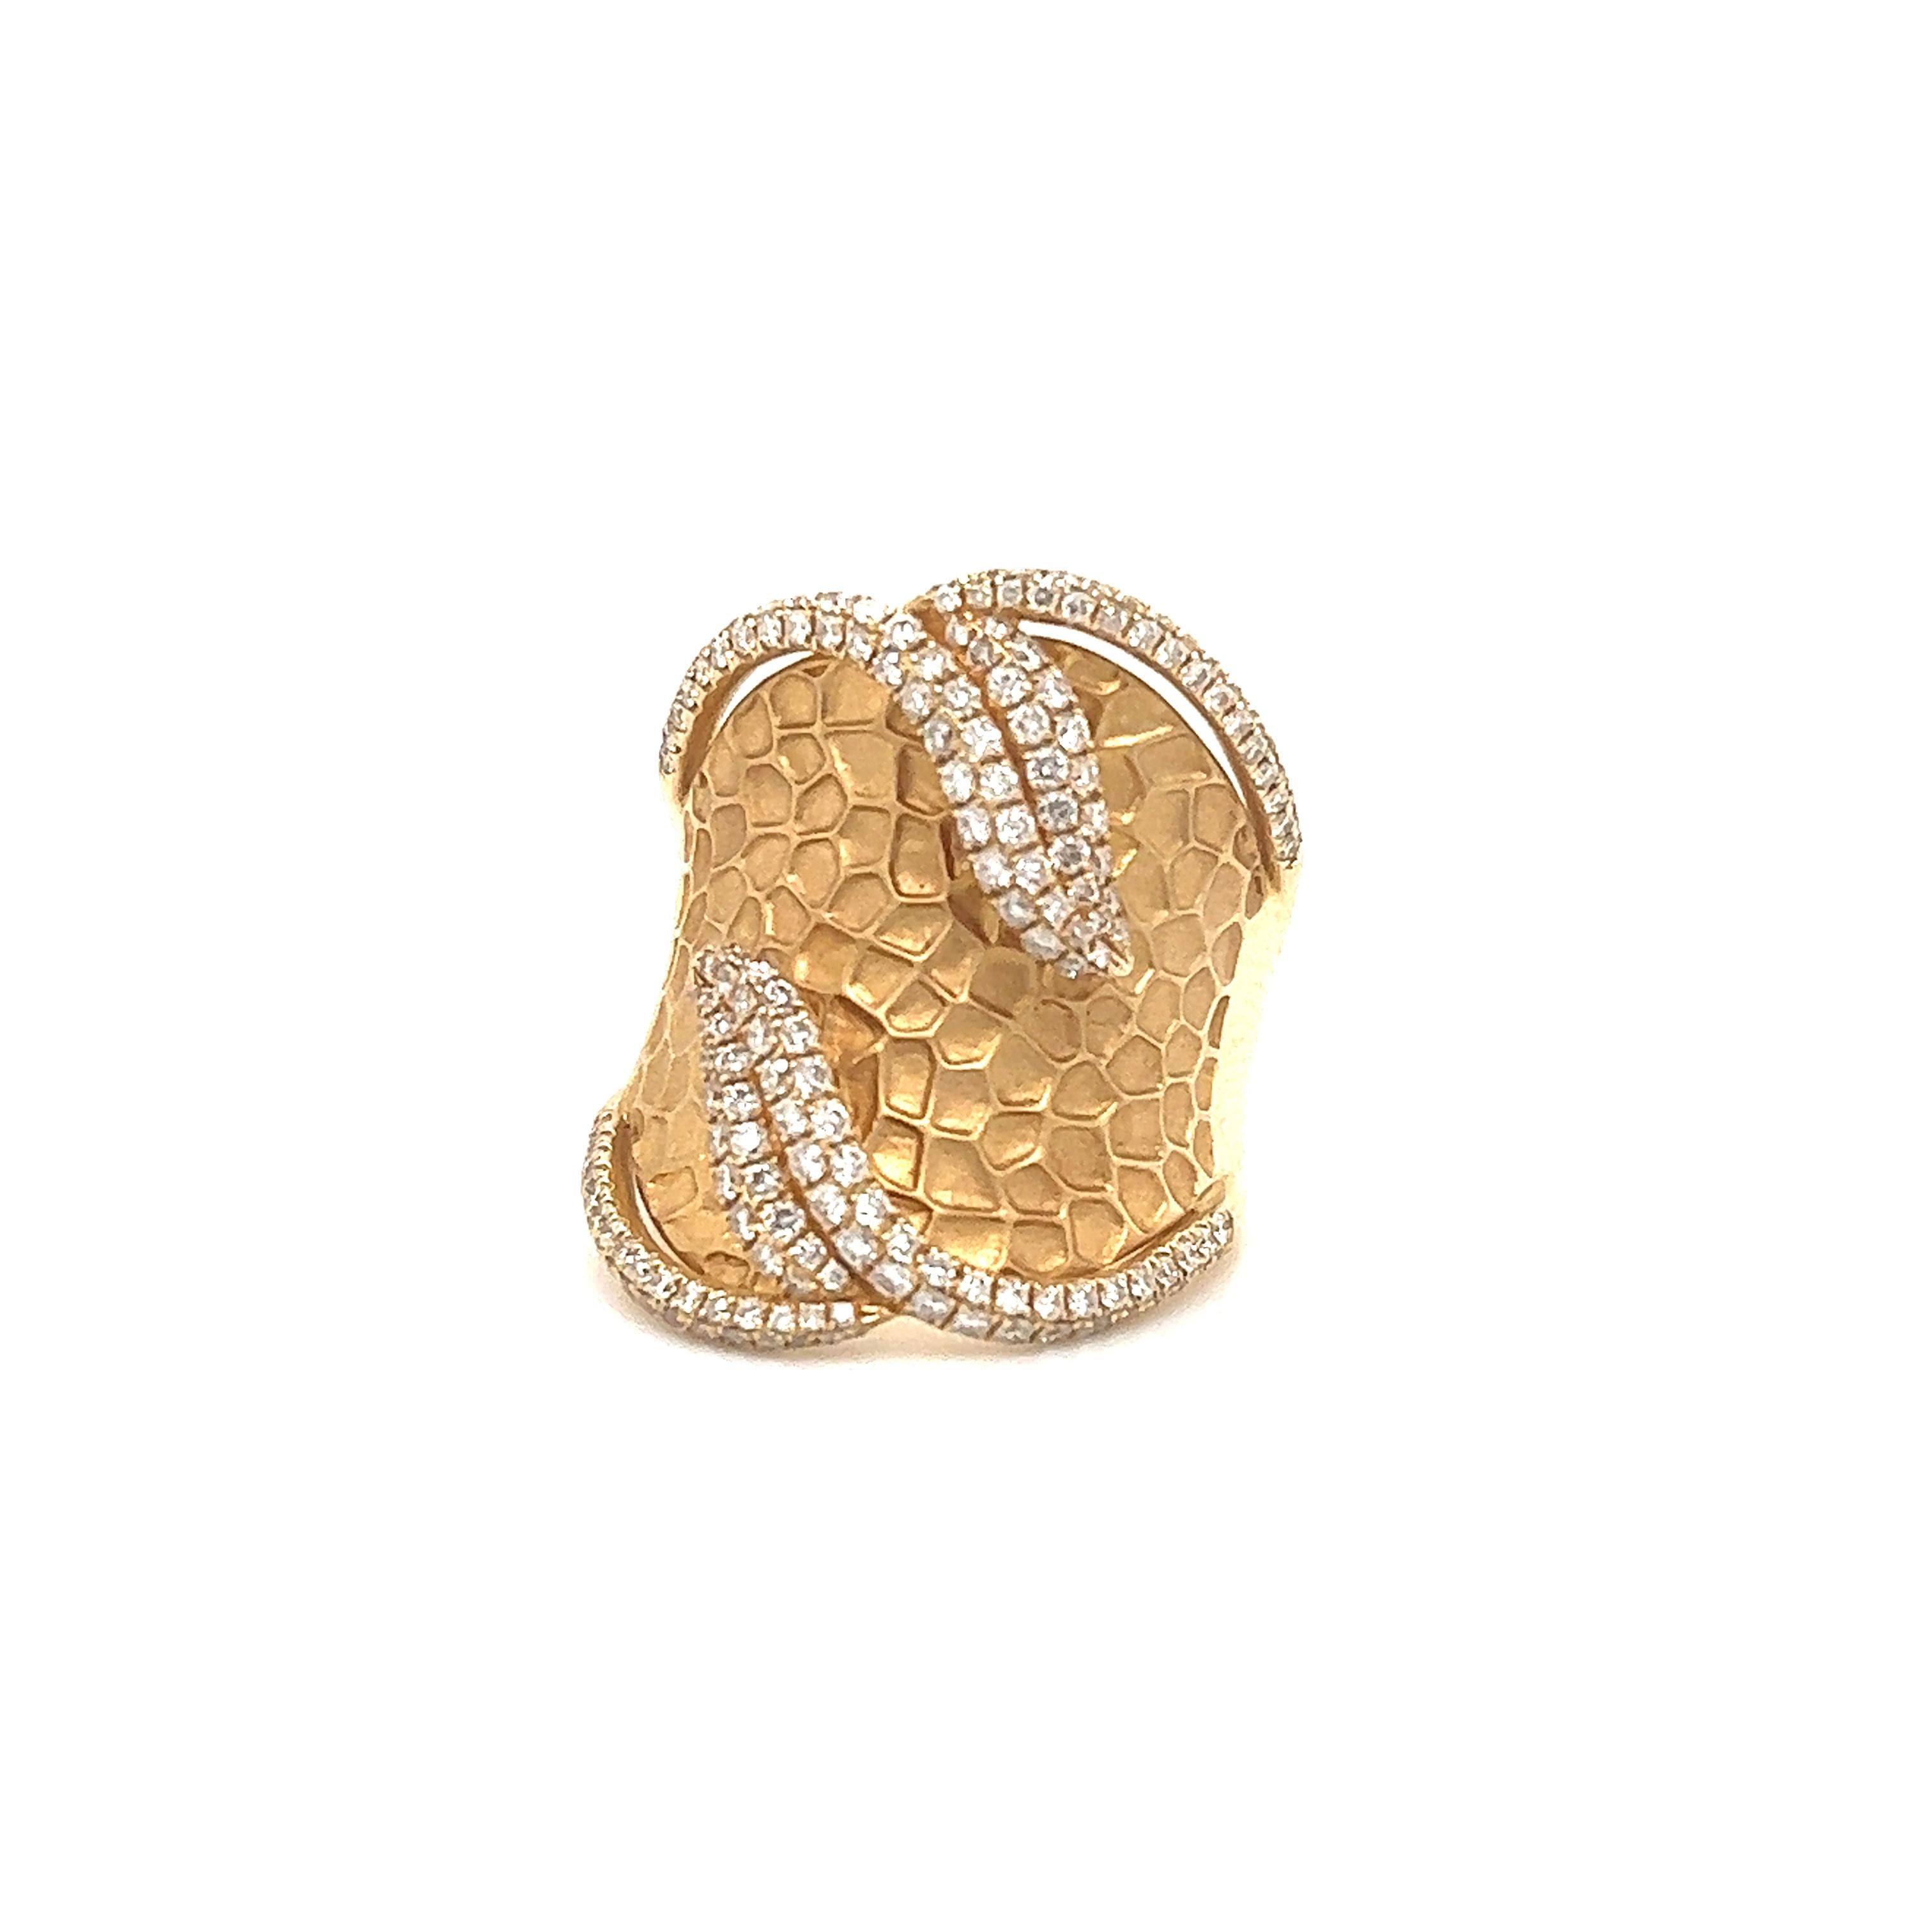 Fantastic design seen on this designer ring by Mouawad. The ring is crafted in 18k yellow gold and shows details throughout. The ring is a wide band design as it measures 23.5 mm on the front and tapers down to 6.5 mm at the base of the shank. The